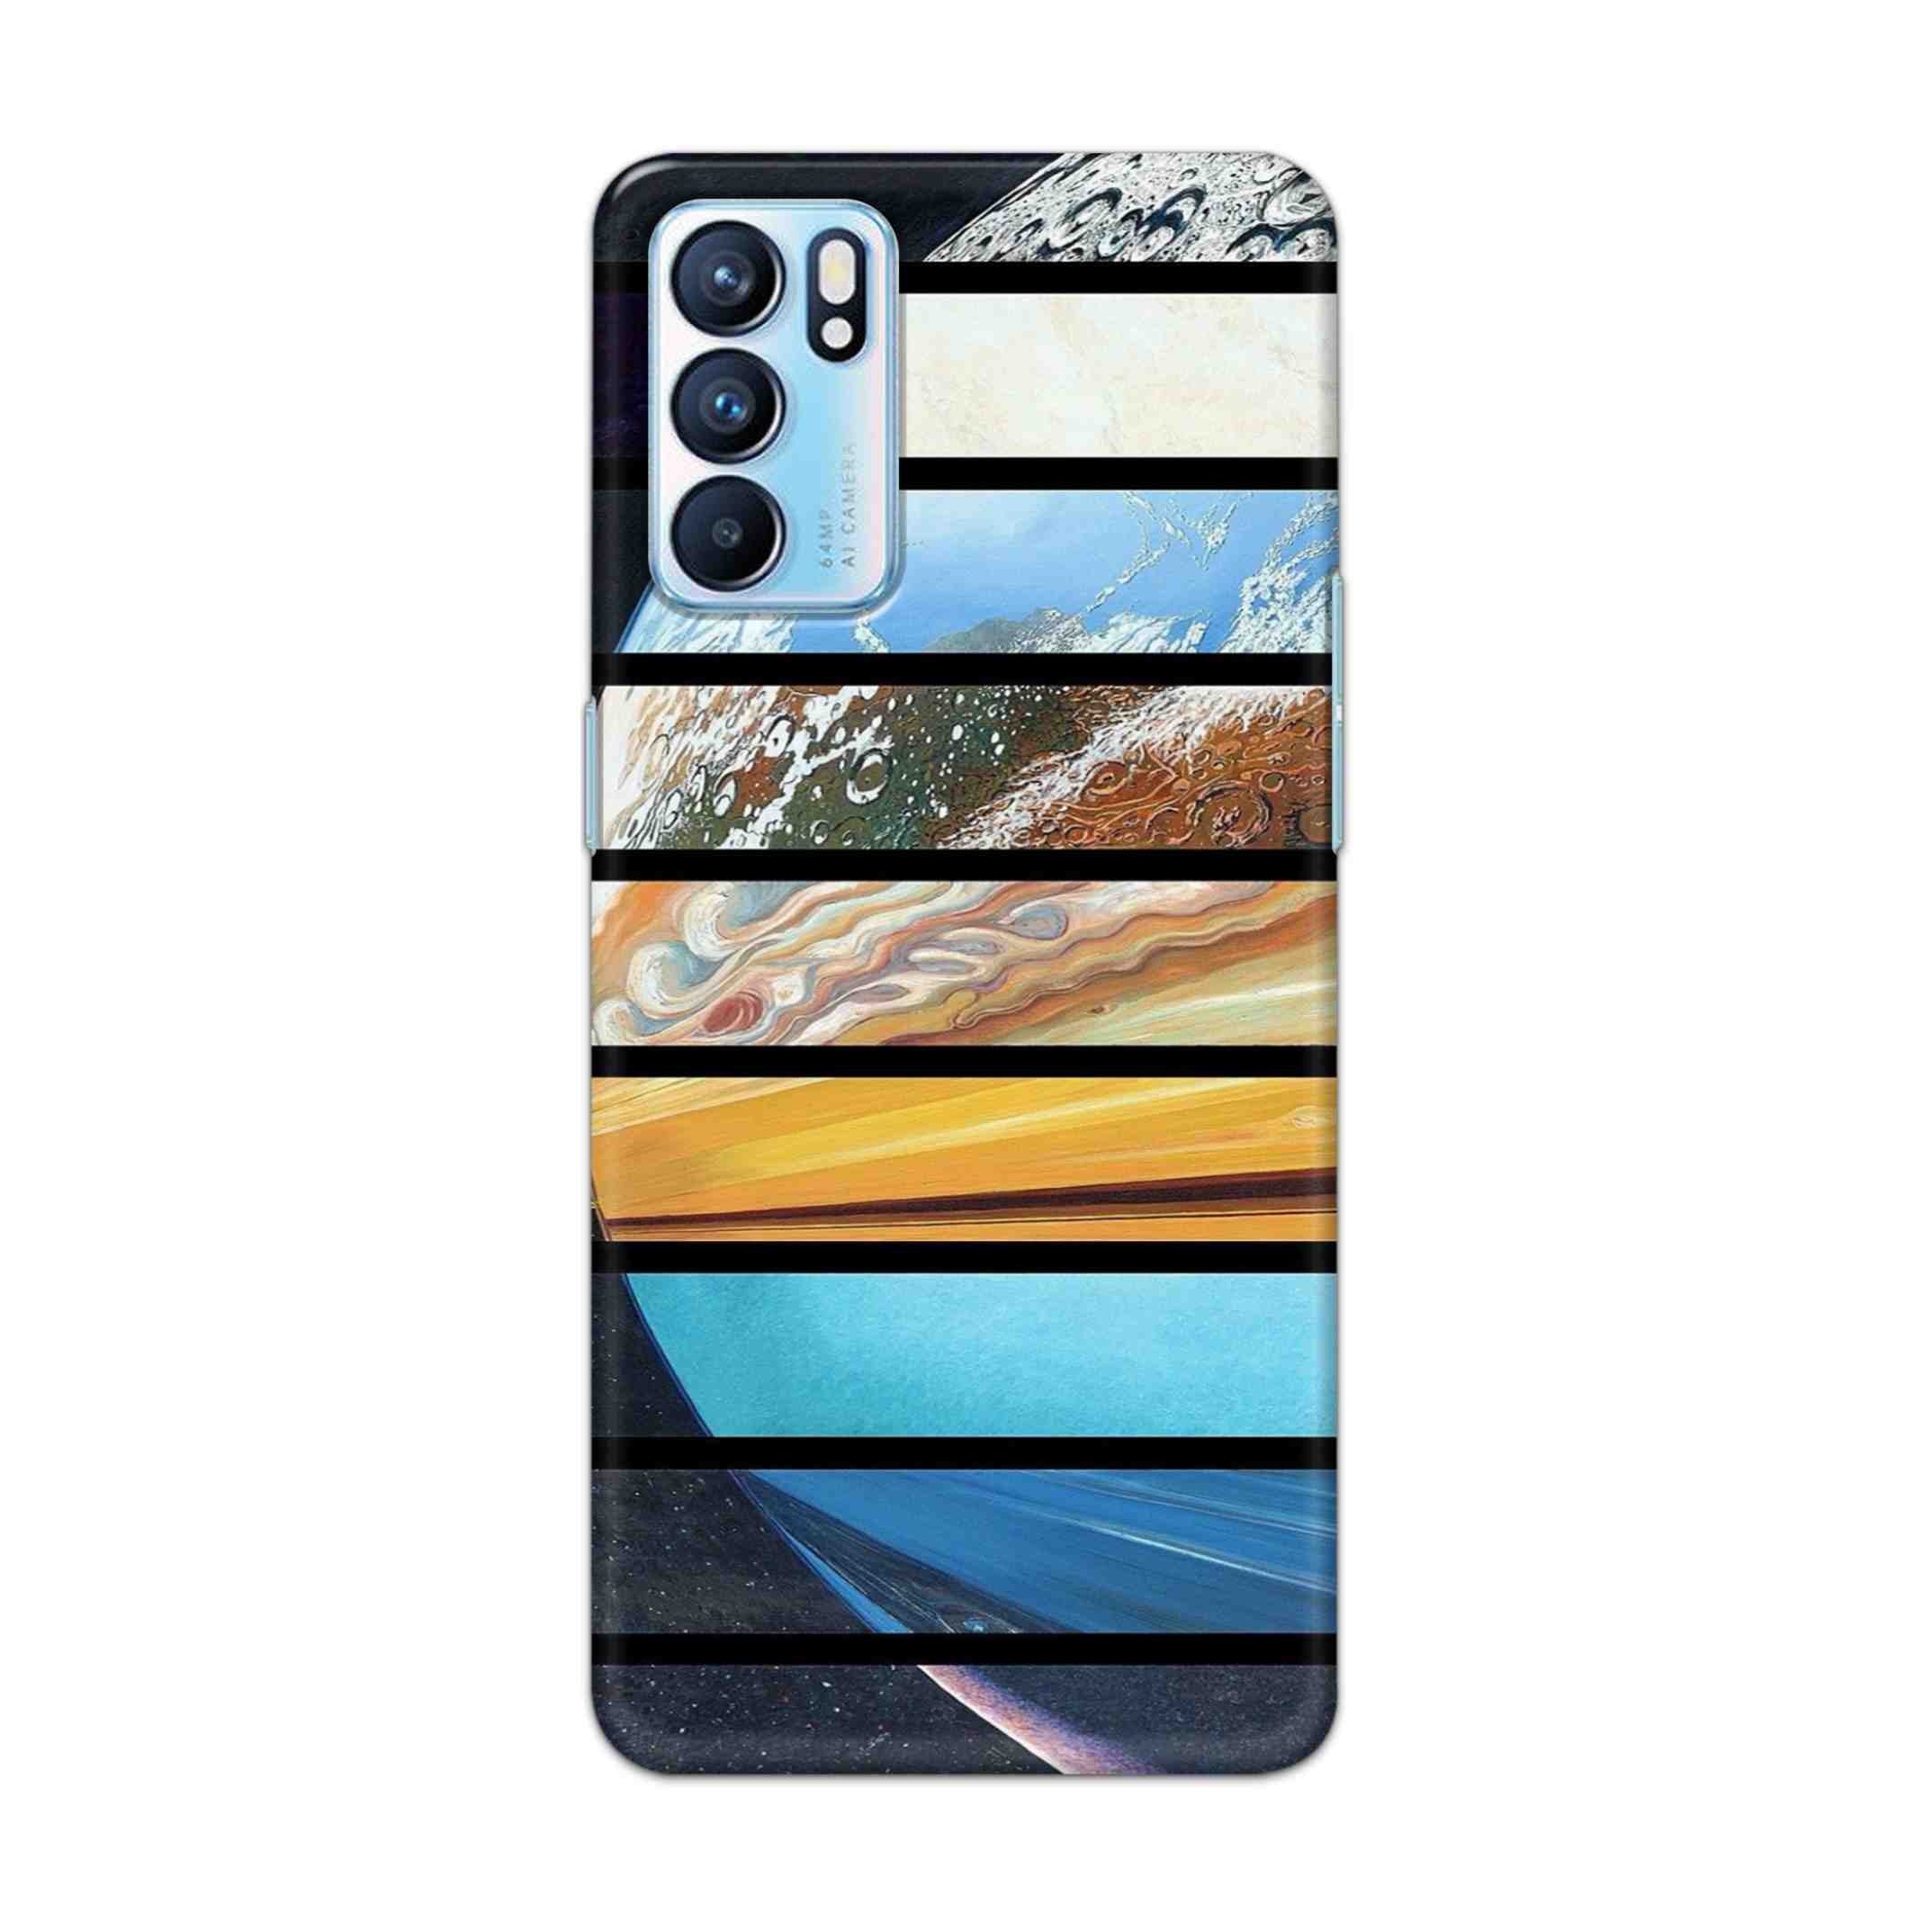 Buy Colourful Earth Hard Back Mobile Phone Case Cover For OPPO RENO 6 Online